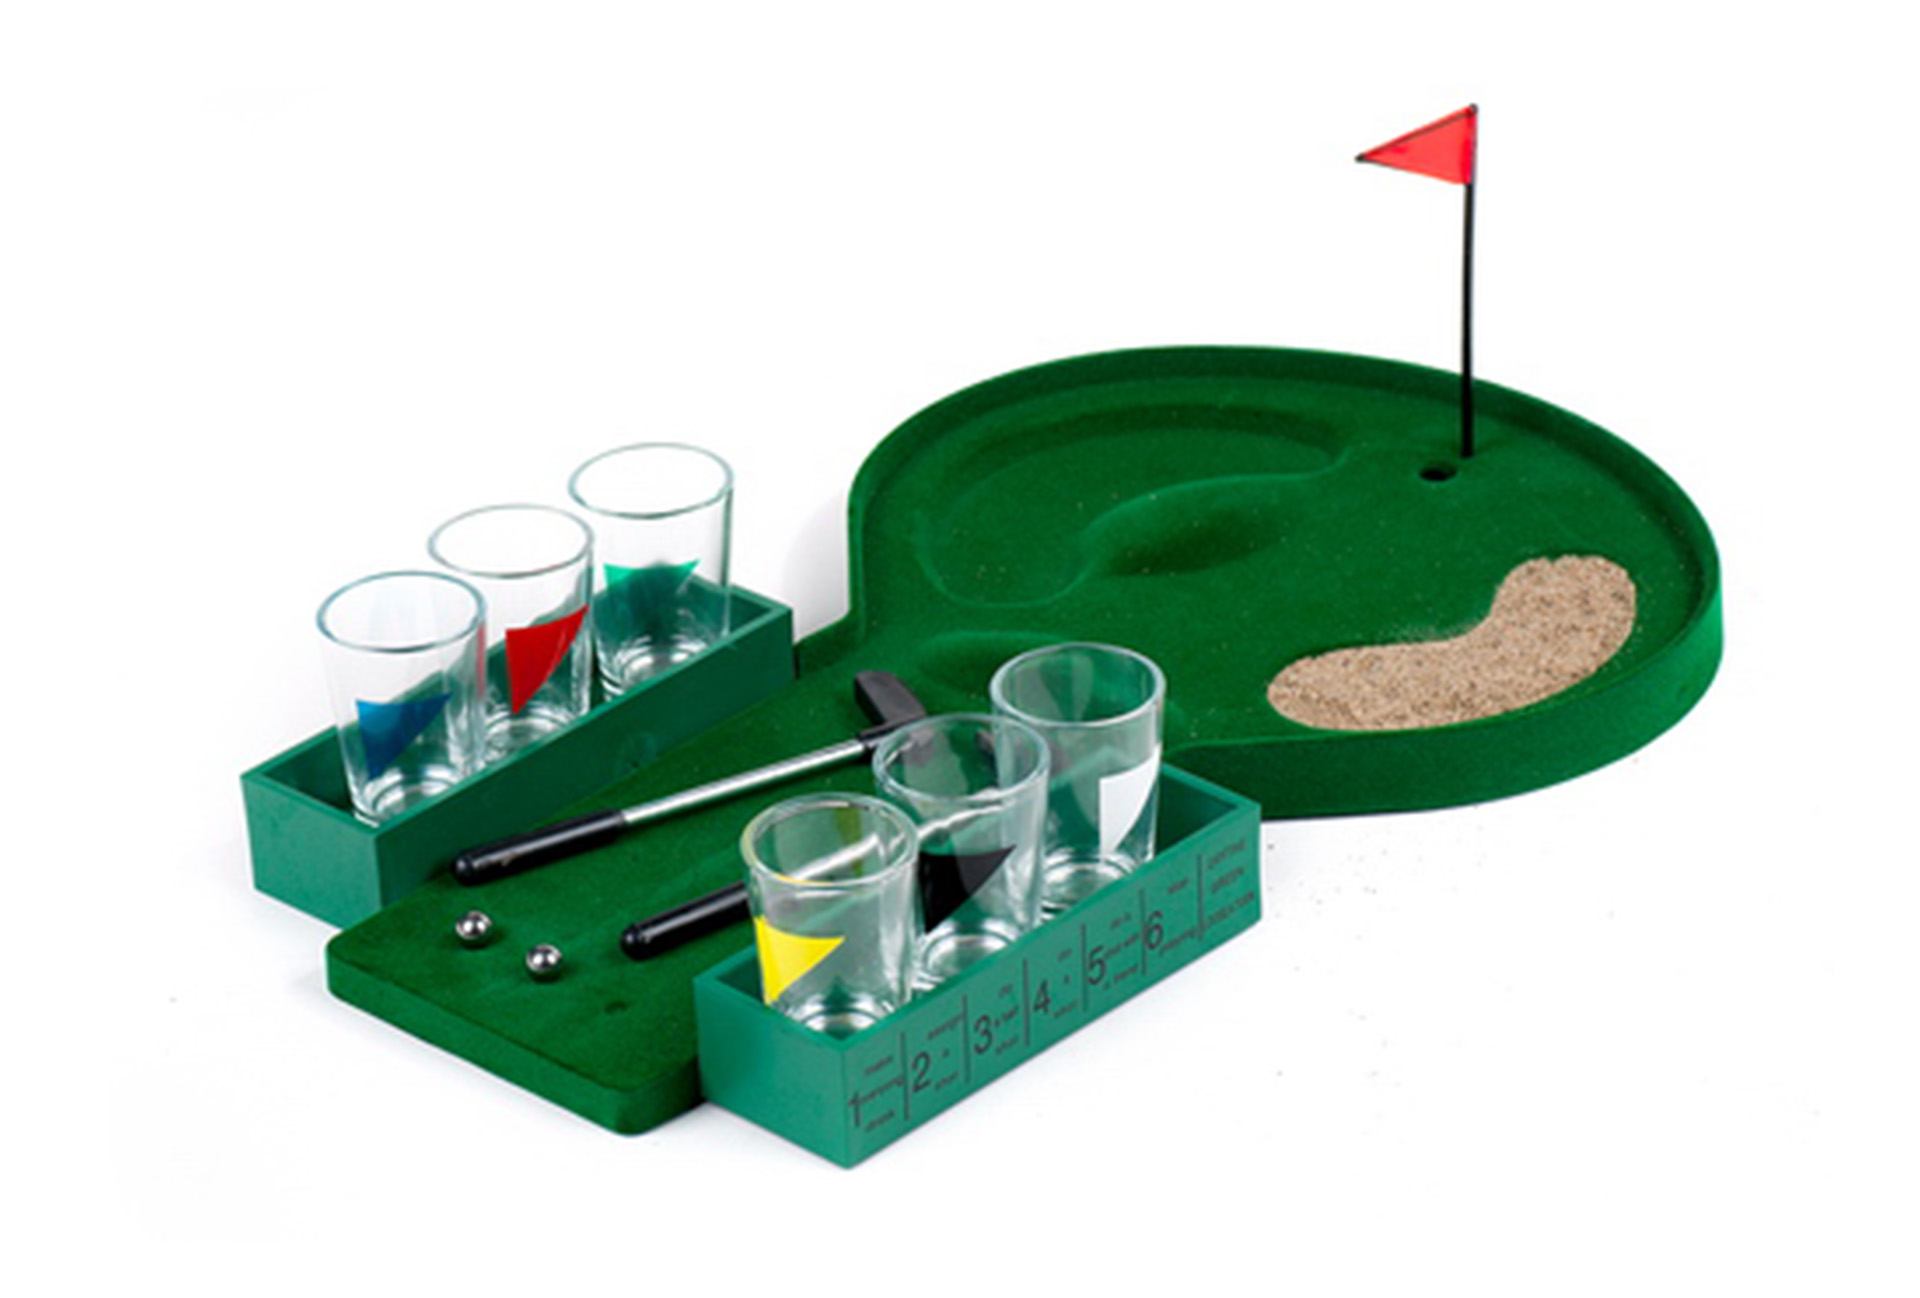 DK1201 DRINKING GOLF WITH 6 CUPS